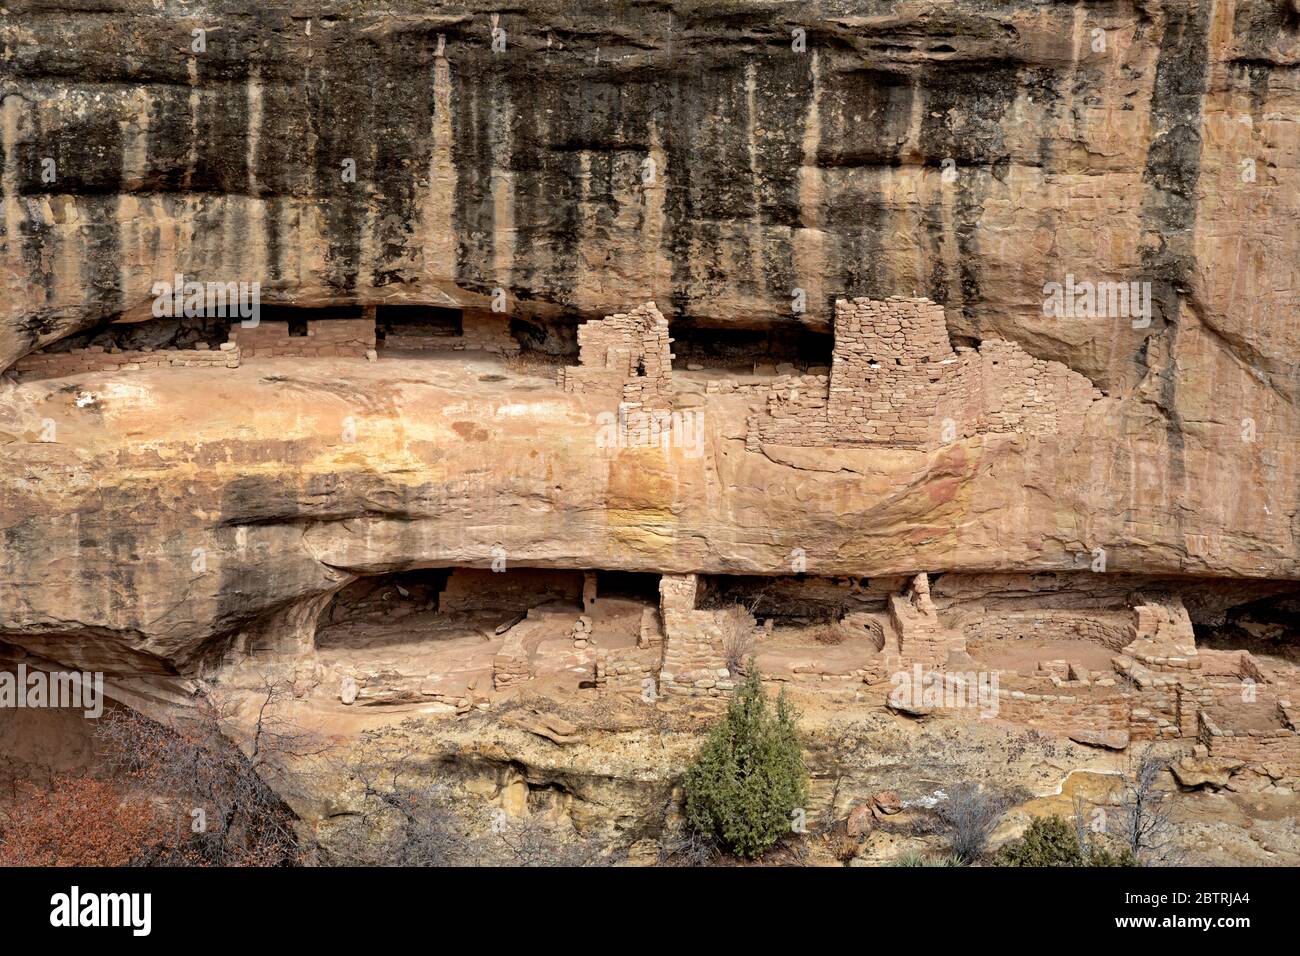 CO00255-00...COLORADO - Part of the Fire Temple/New Fire House complex ruins  created by Ancestral Puebloans 700 years ago; Mesa Verde National Park  Stock Photo - Alamy